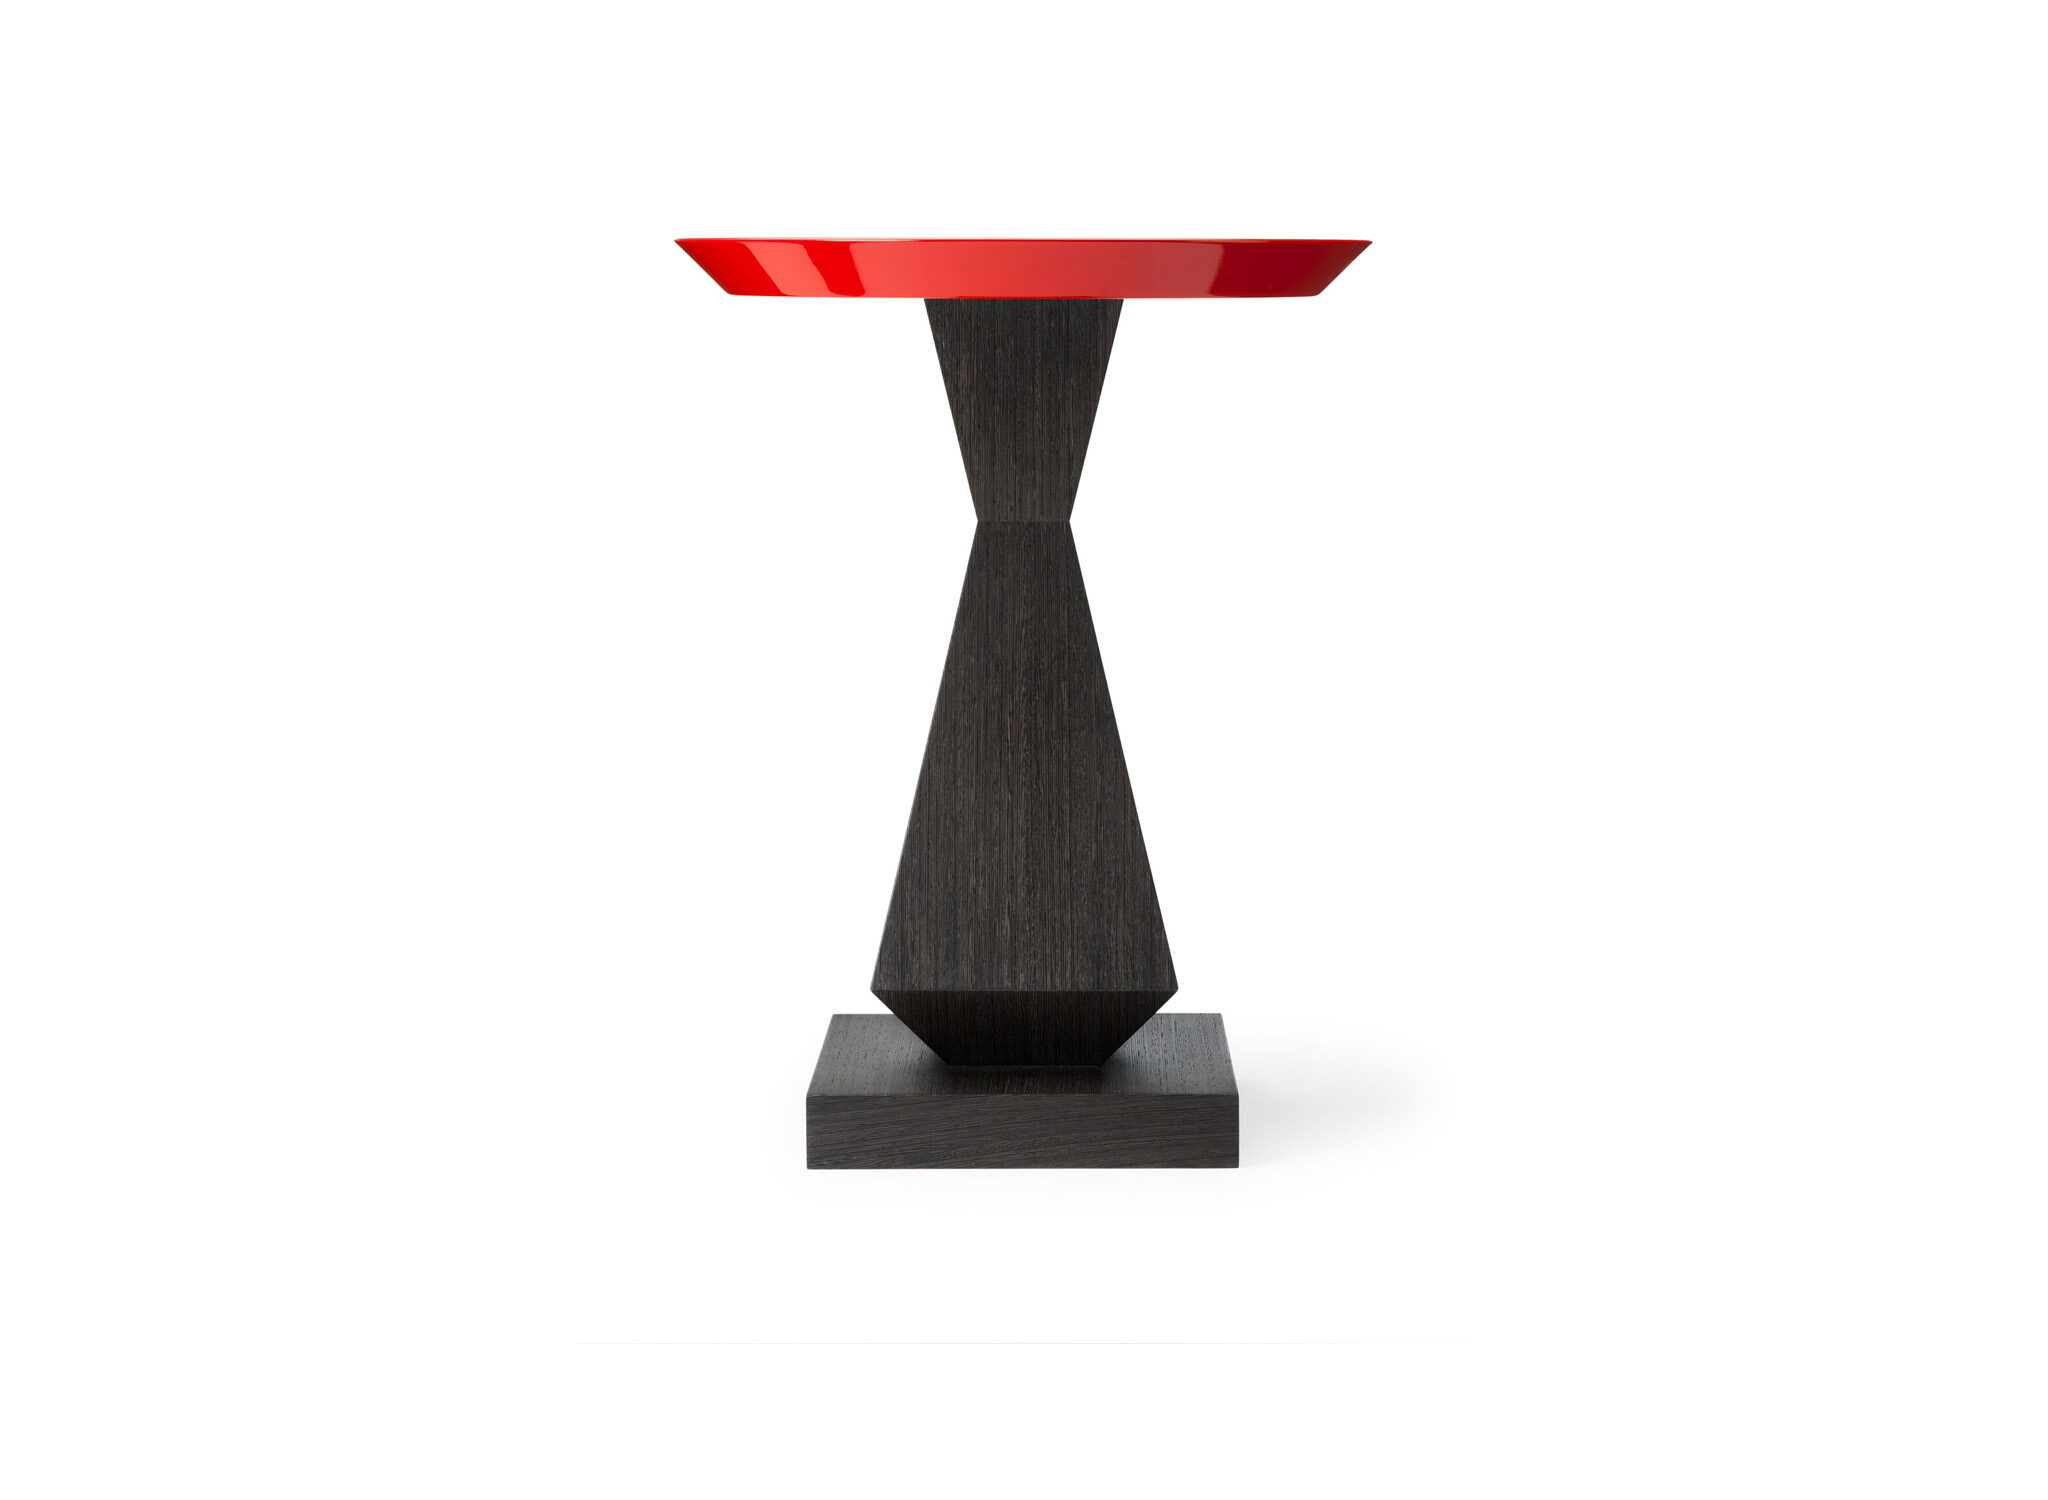 The Edo Occasional Table - Shown here in traditionally ebonised oak with a red lacquered top.